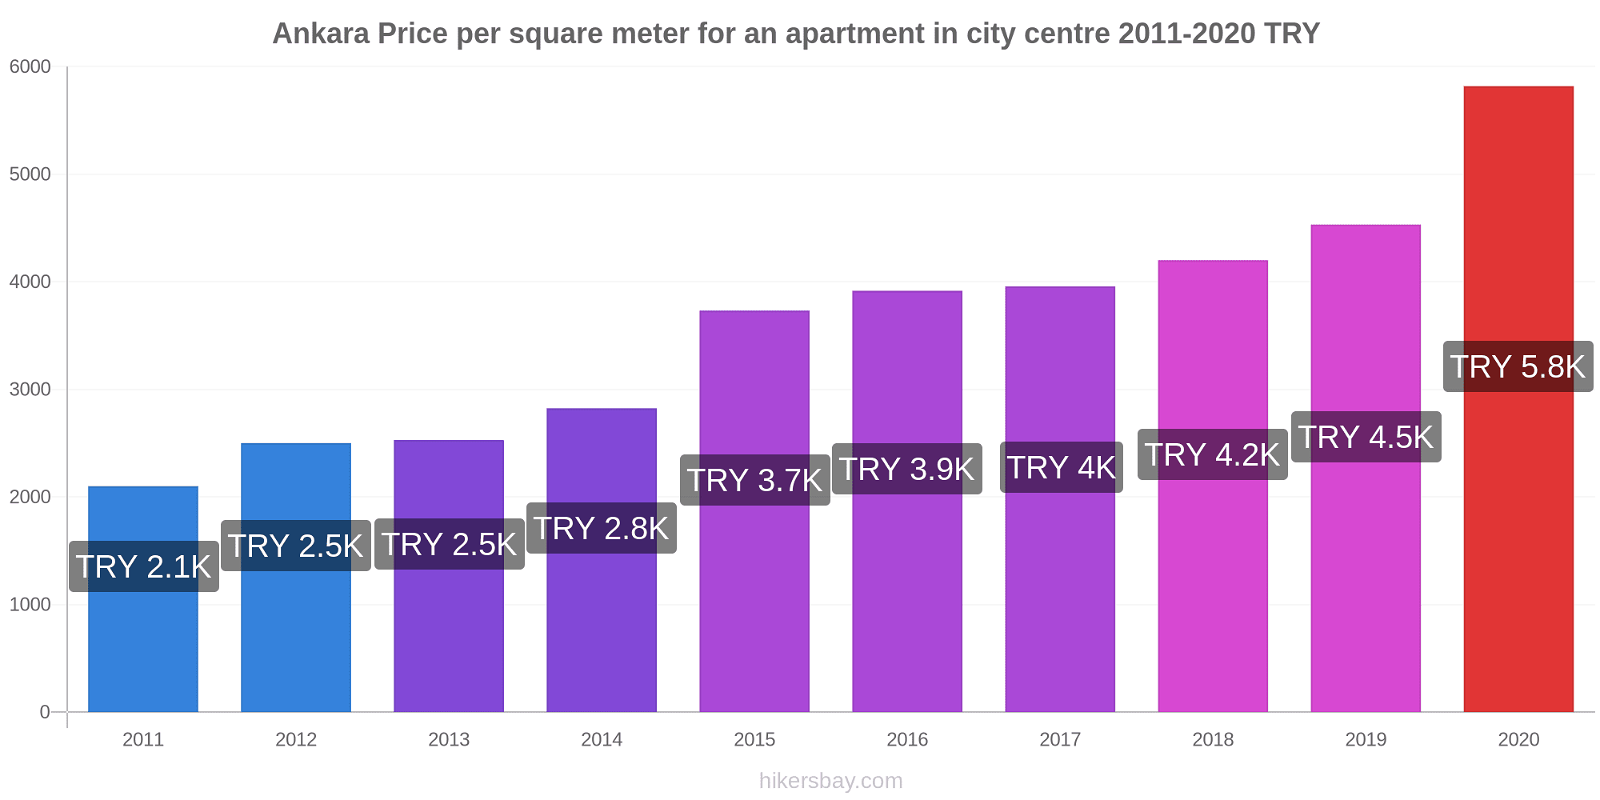 Ankara price changes Price per square meter for an apartment in city centre hikersbay.com